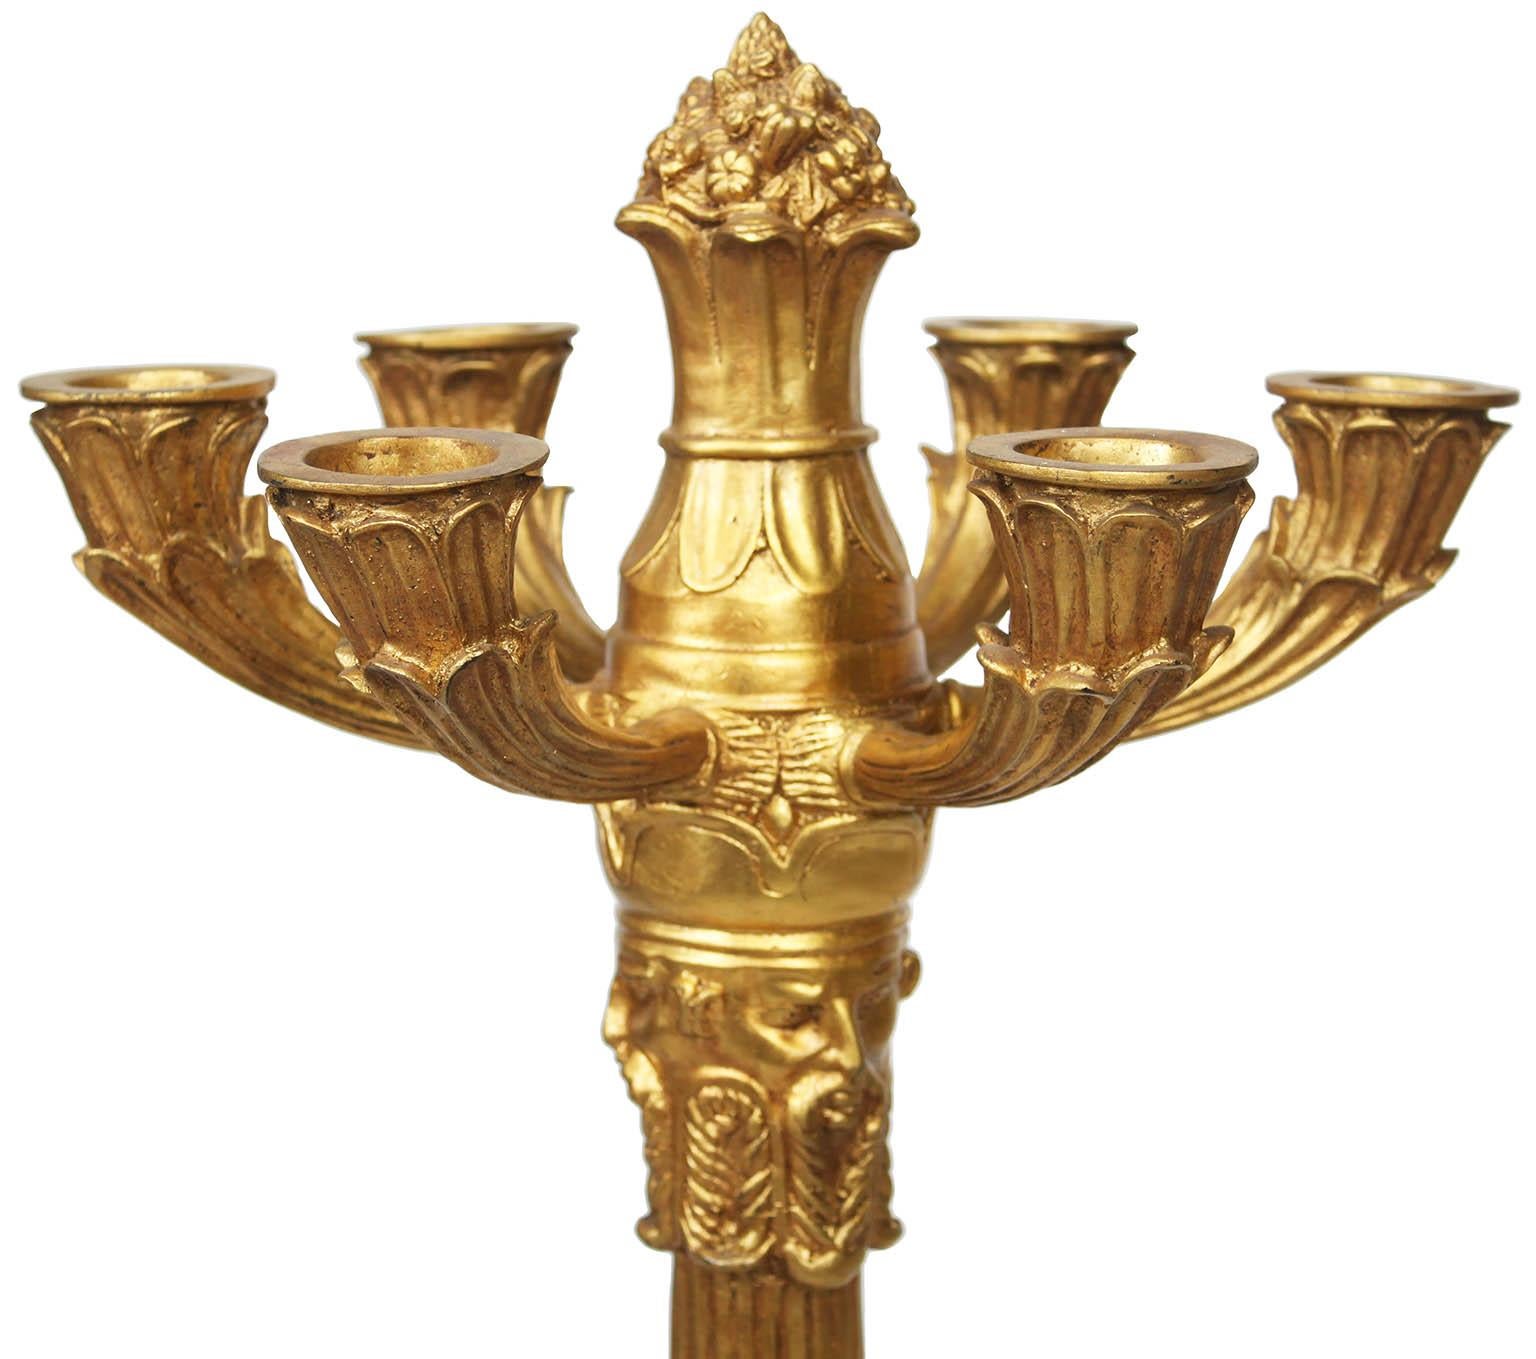  Pair of Empire Style Gilt-Metal Six-Light Candelabra, After a Model by Thomire In Good Condition For Sale In Los Angeles, CA